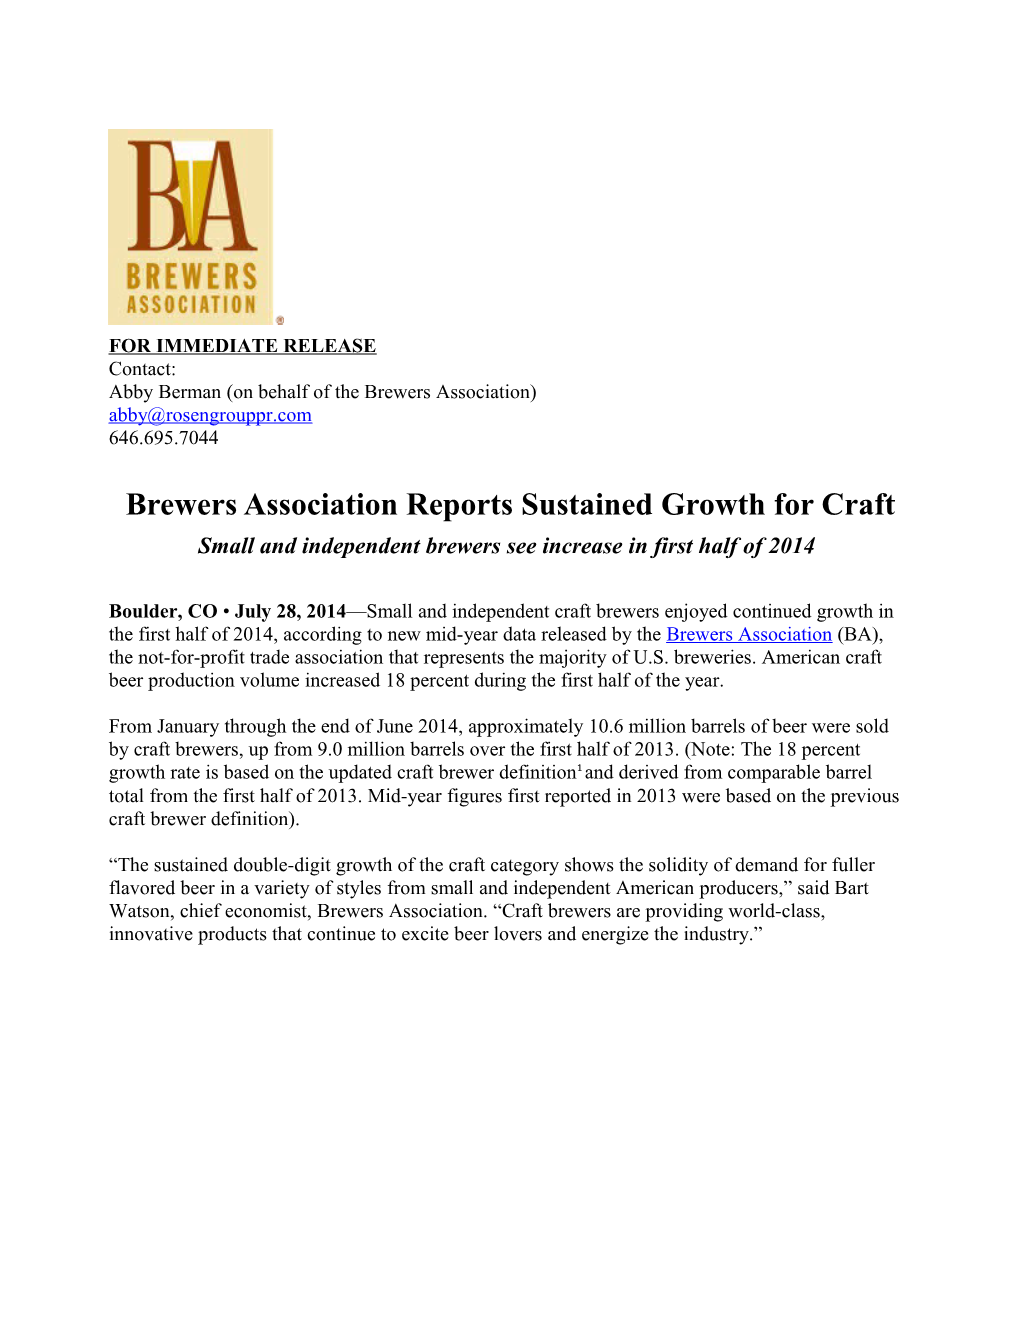 Brewers Association Reportssustained Growthfor Craft